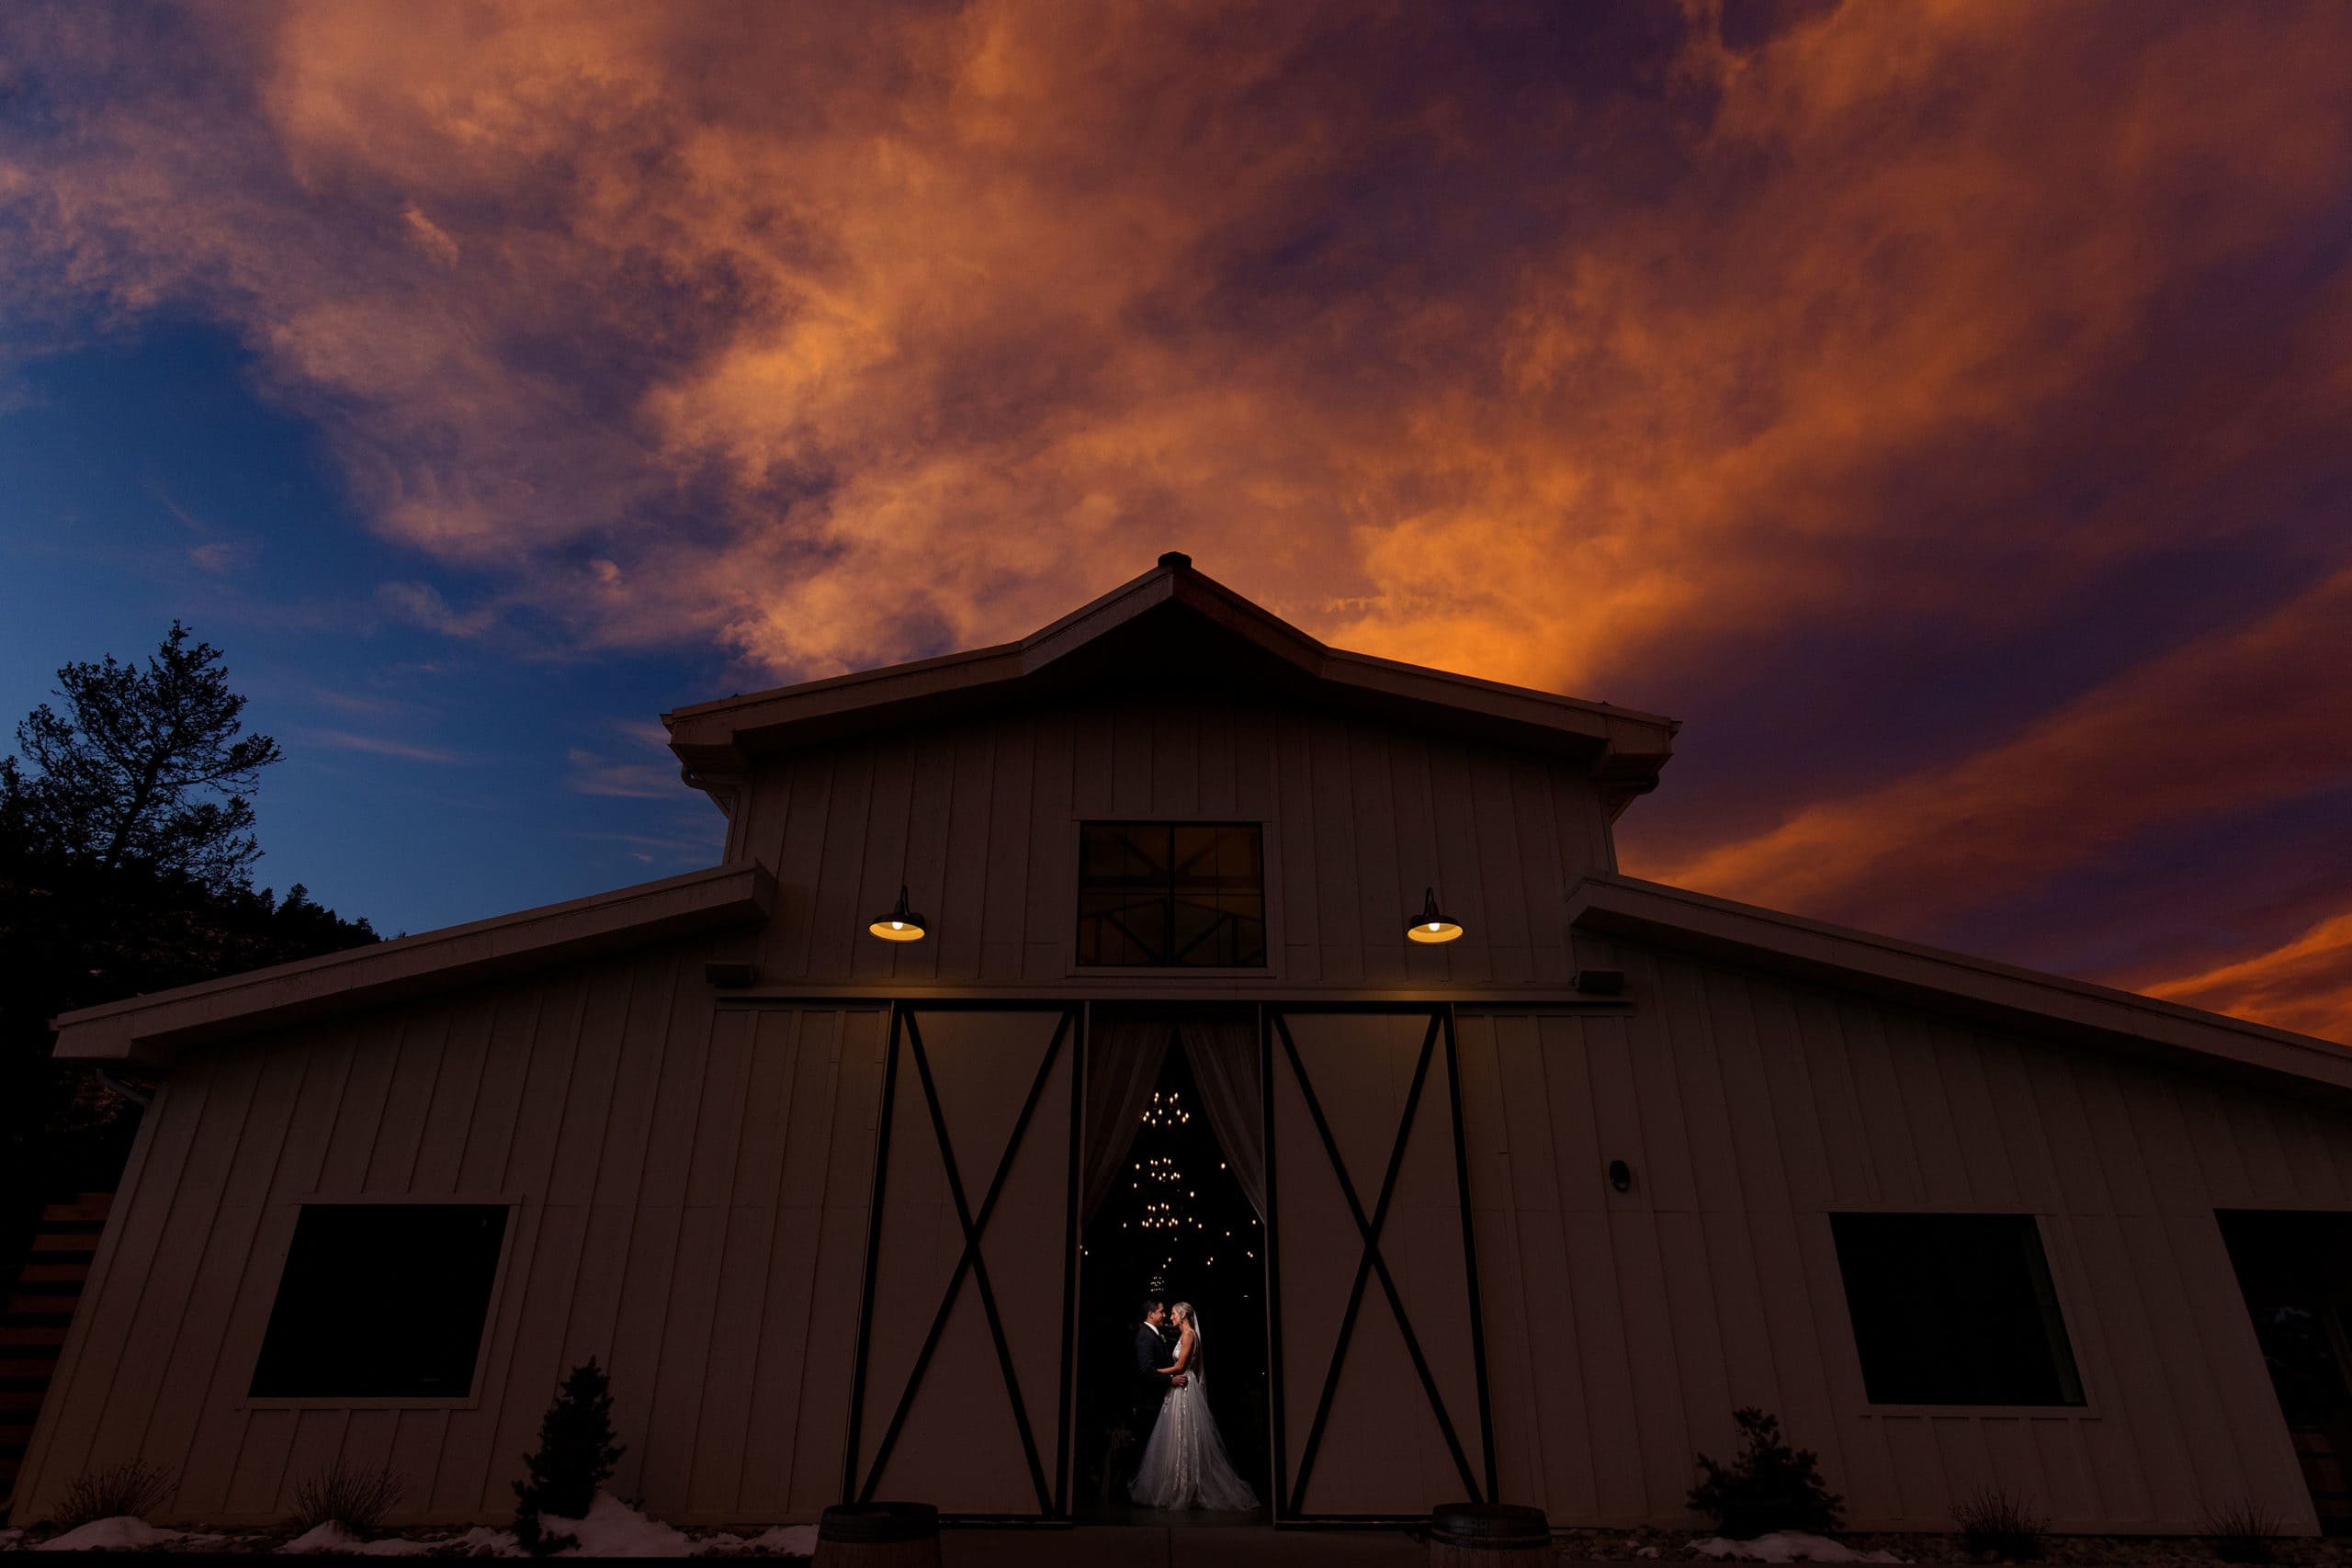 Newlyweds pose between the barn doors at sunset during their wedding at Woodlands in Morrison, CO